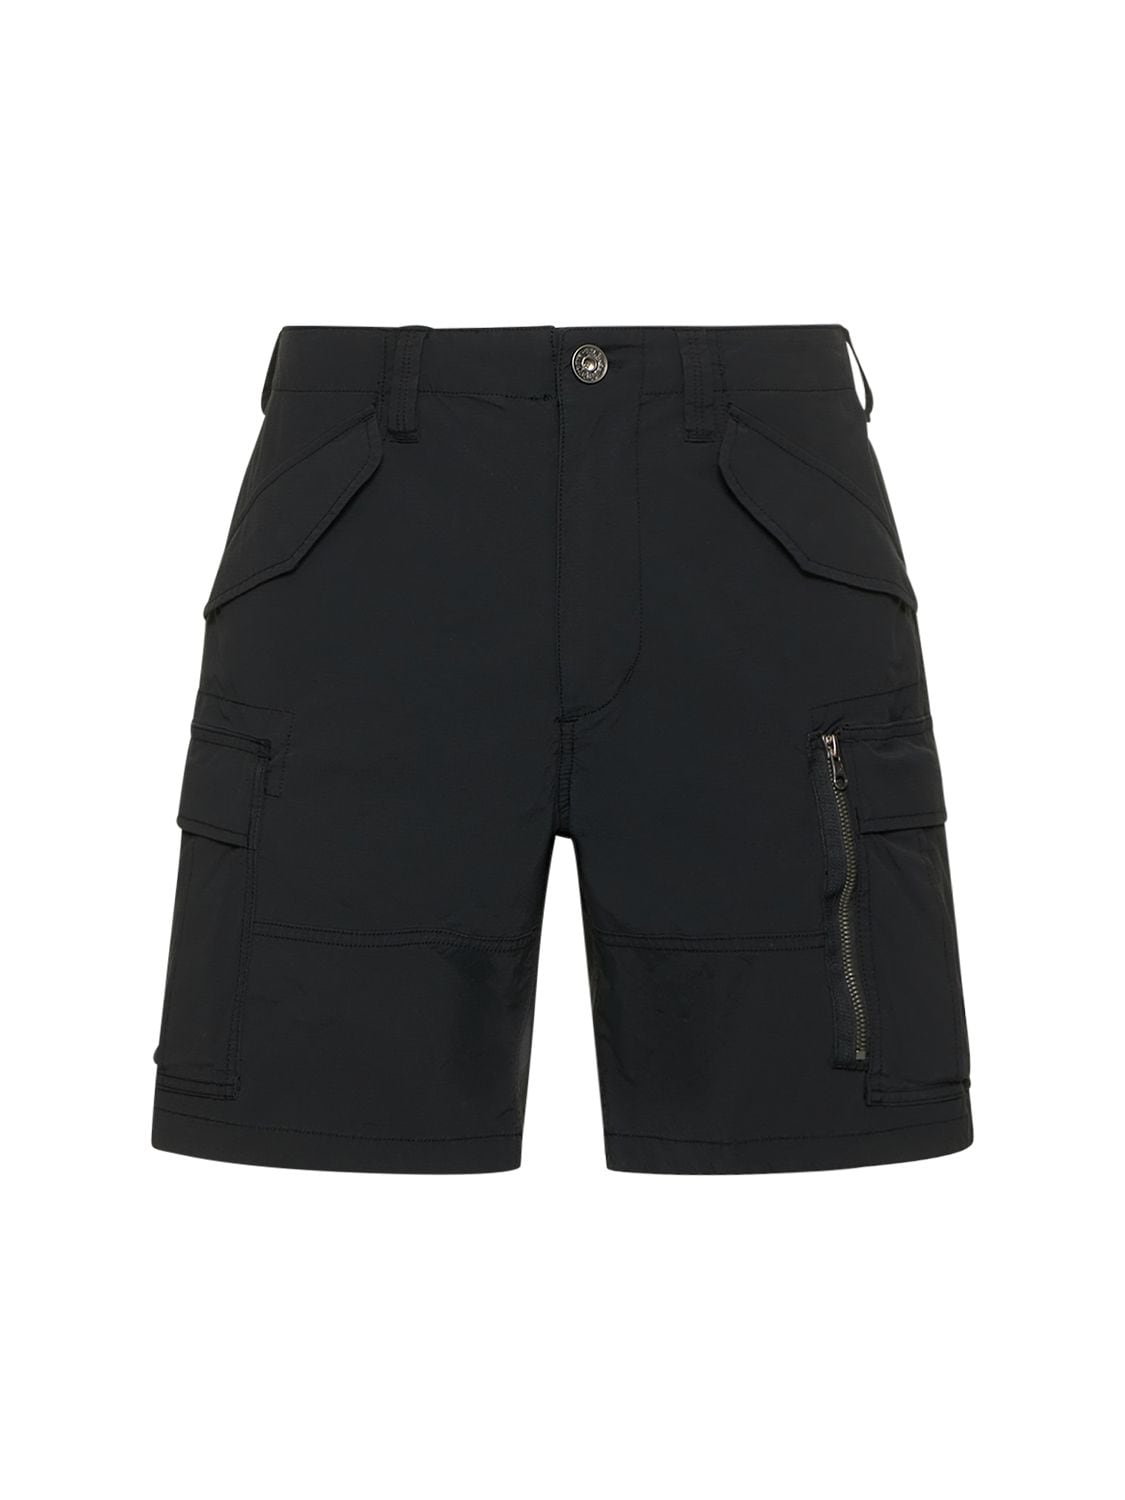 Chip Cotton Ripstop Cargo Shorts | The Hoxton Trend